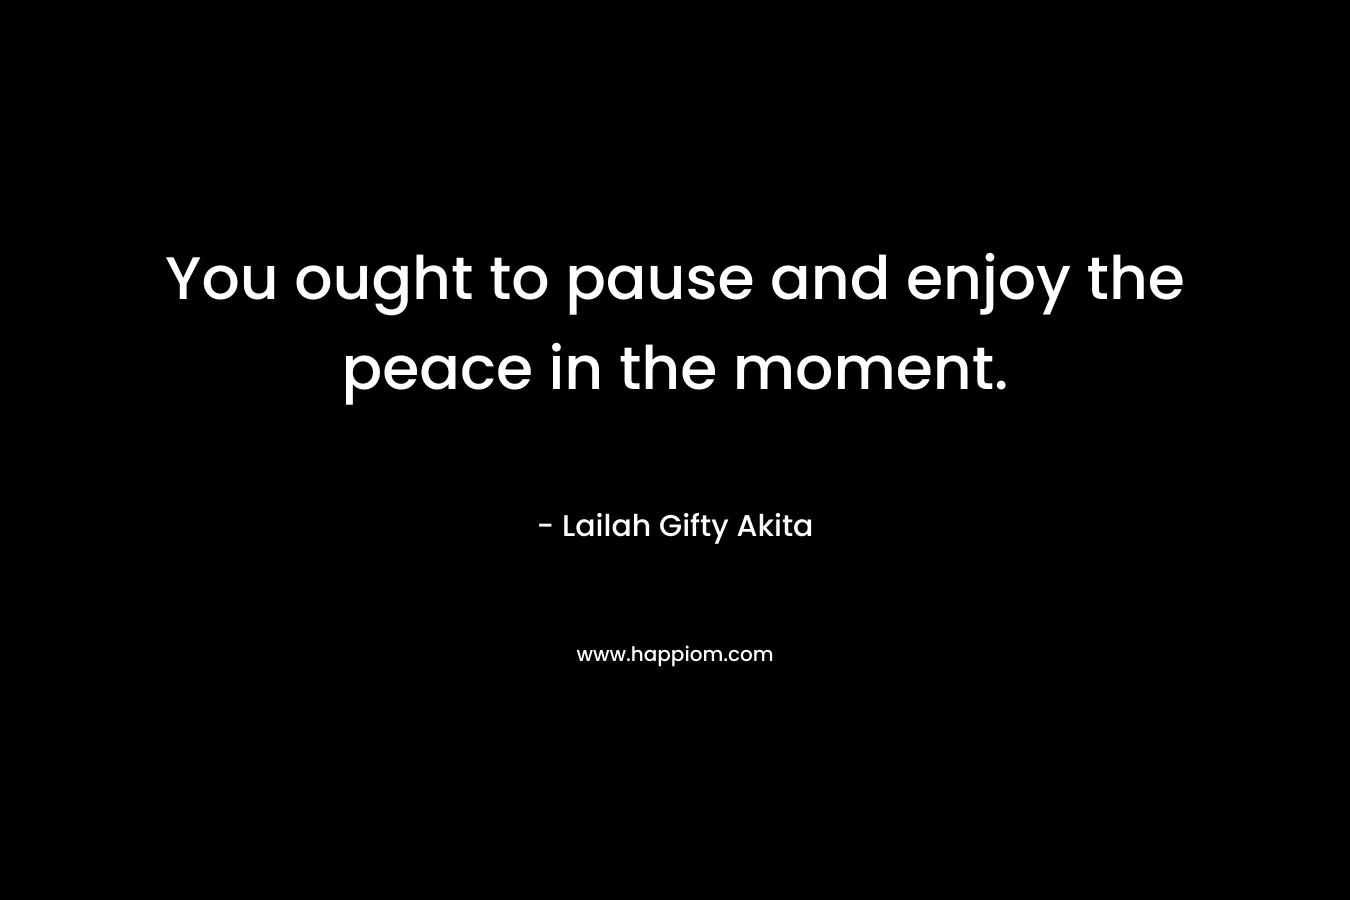 You ought to pause and enjoy the peace in the moment.